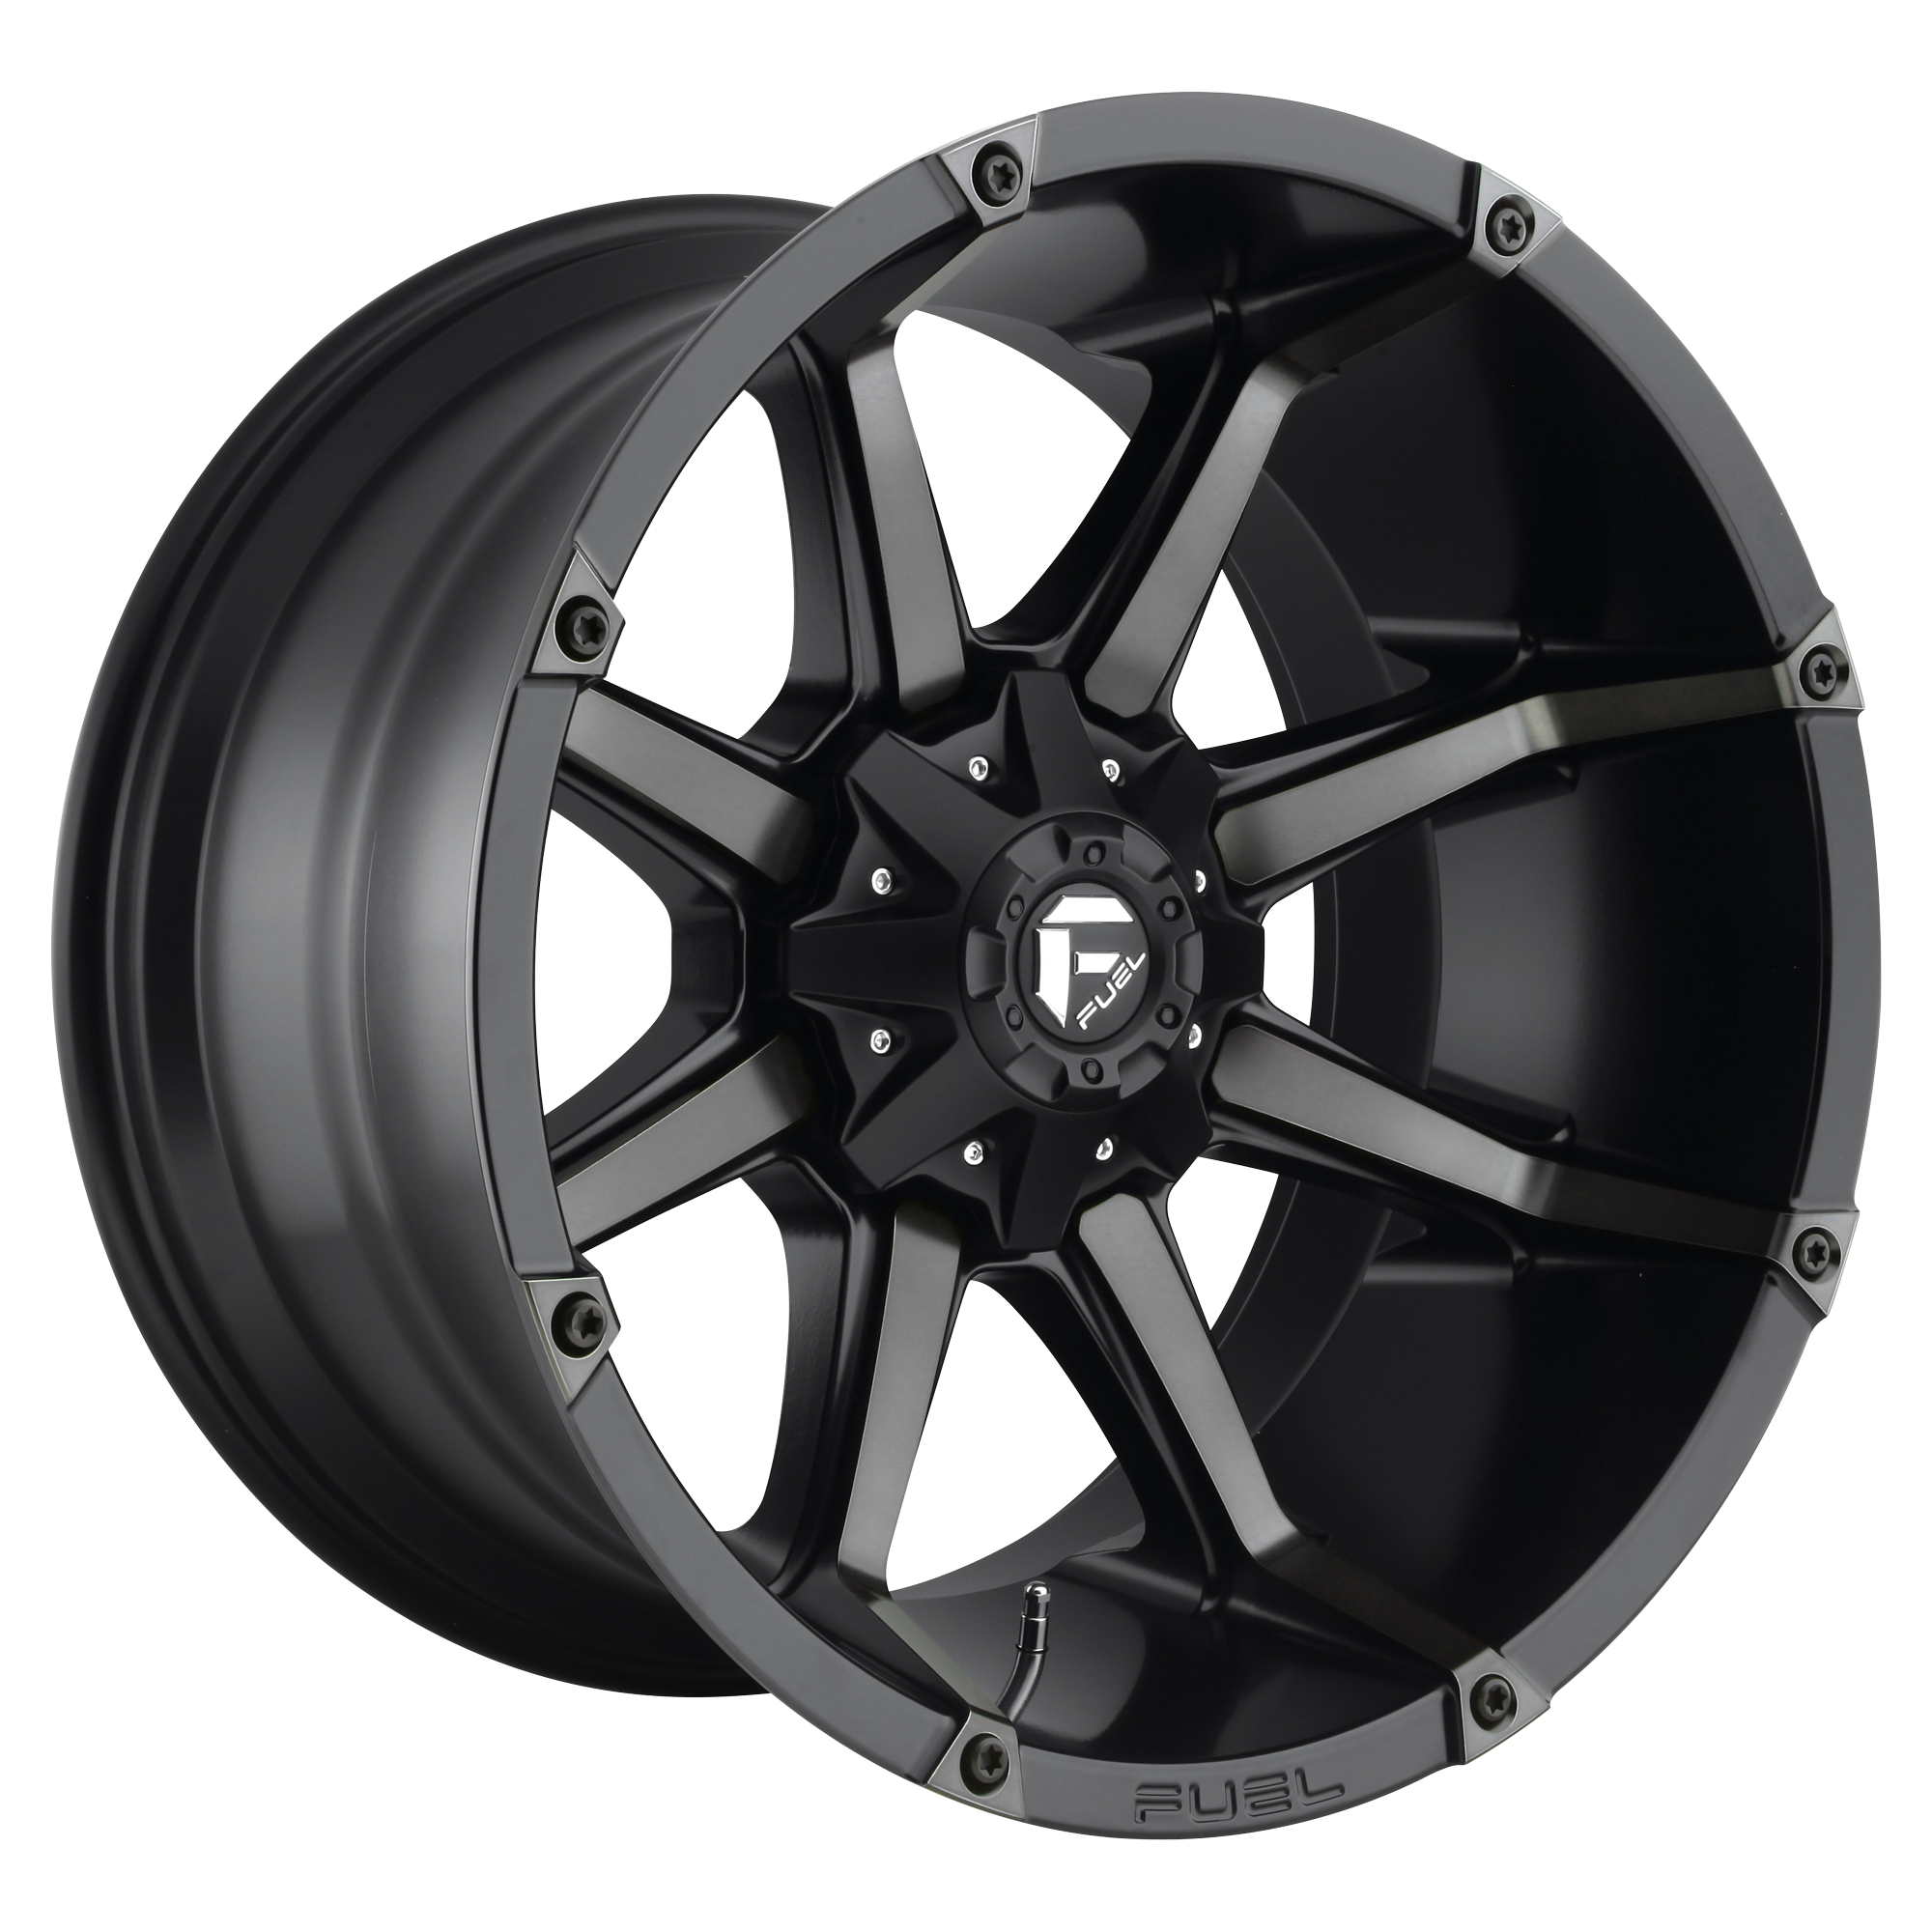 COUPLER 20x10 5x114.30/5x127.00 MATTE BLACK DOUBLE DARK TINT (-24 mm) - Tires and Engine Performance